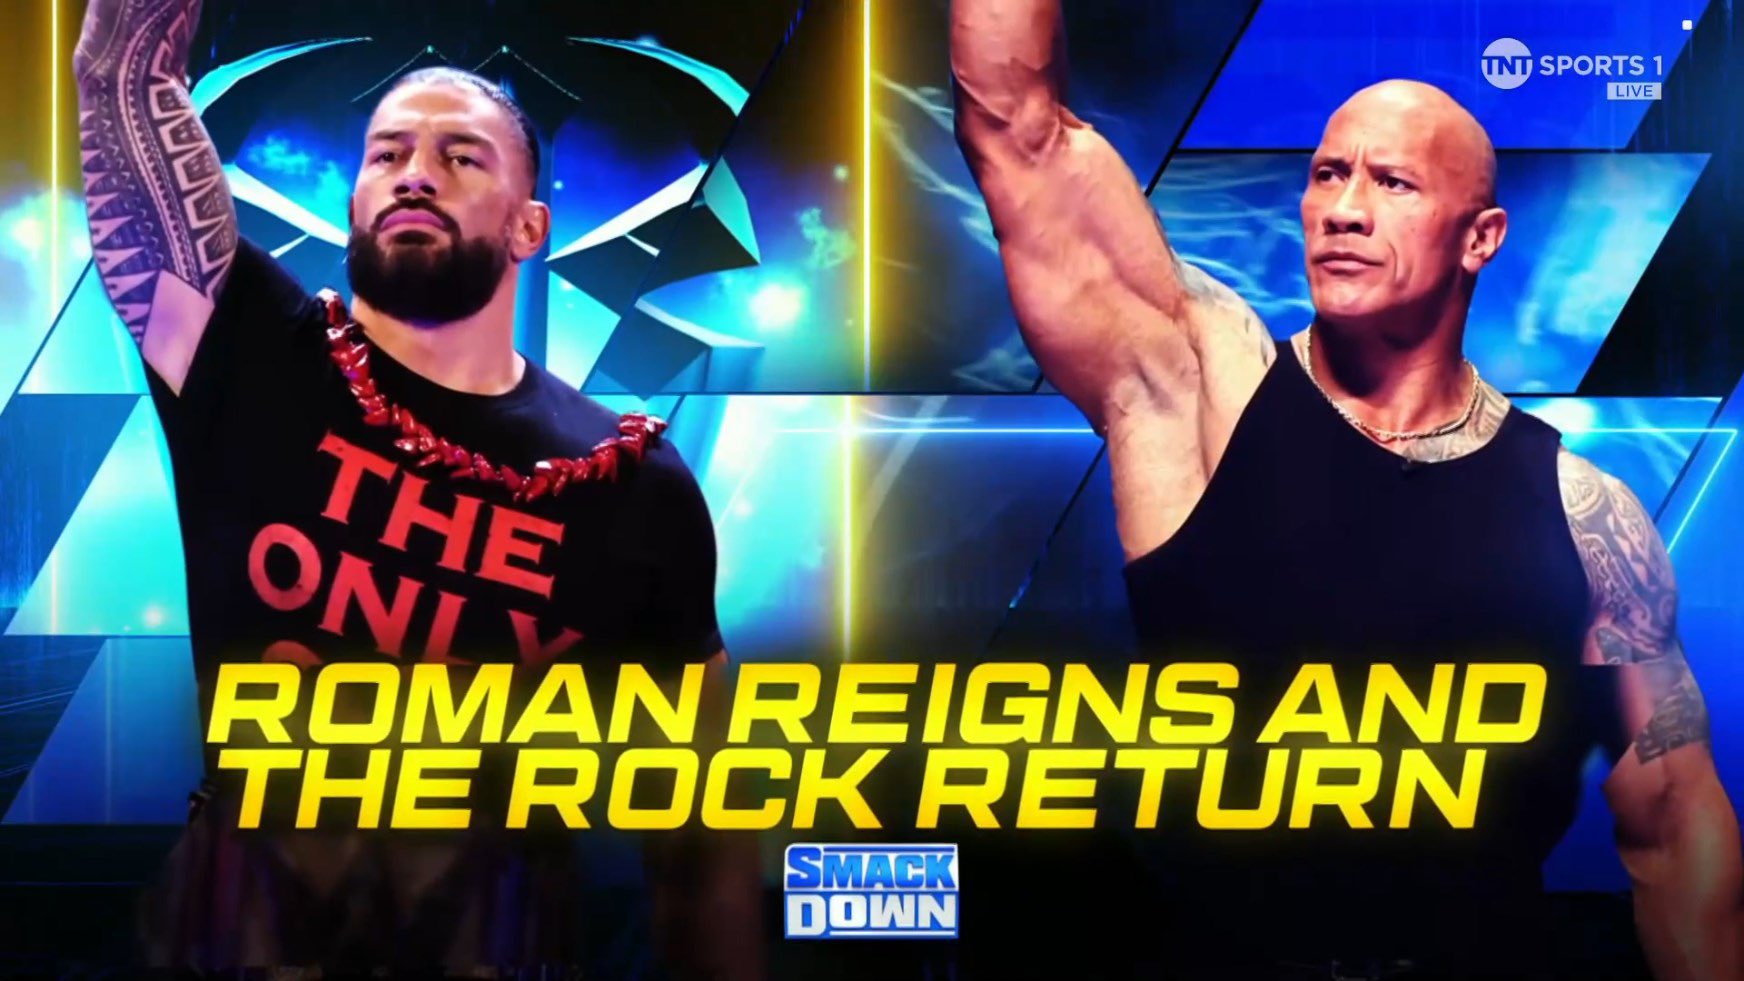 A WWE SmackDown graphic promoting the return of Roman Reigns and The Rock.